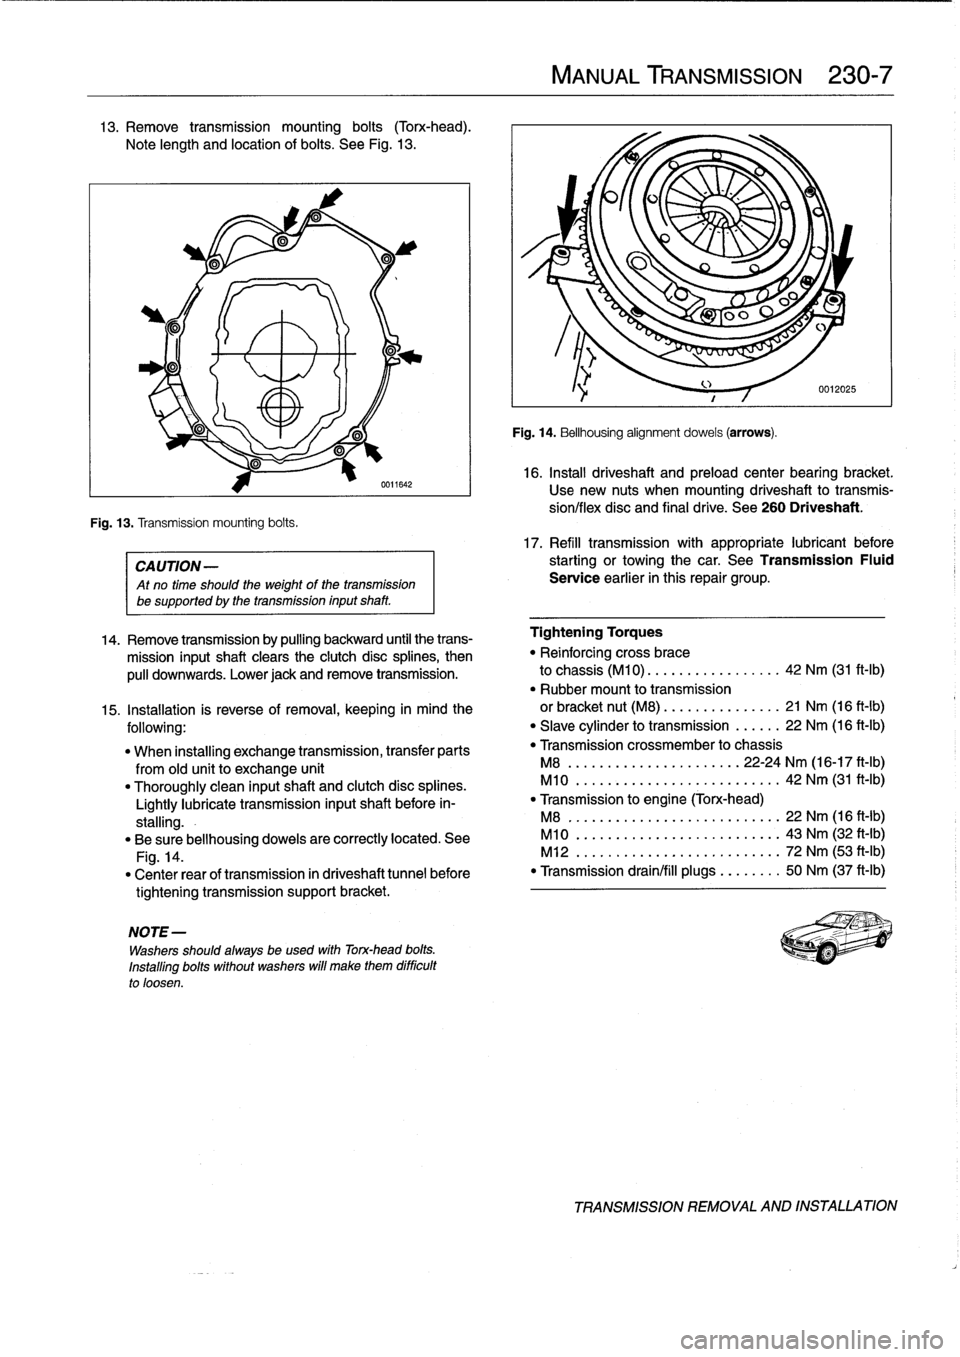 BMW 318i 1997 E36 Manual PDF 13
.
Remove
transmission
mounting
bolts
(Torx-head)
.

Note
length
and
location
of
bolts
.
See
Fig
.
13
.

Fig
.
13
.
Transmission
mounting
bolts
.

0611642

CA
UTION-

Atno
time
should
the
weight
of
